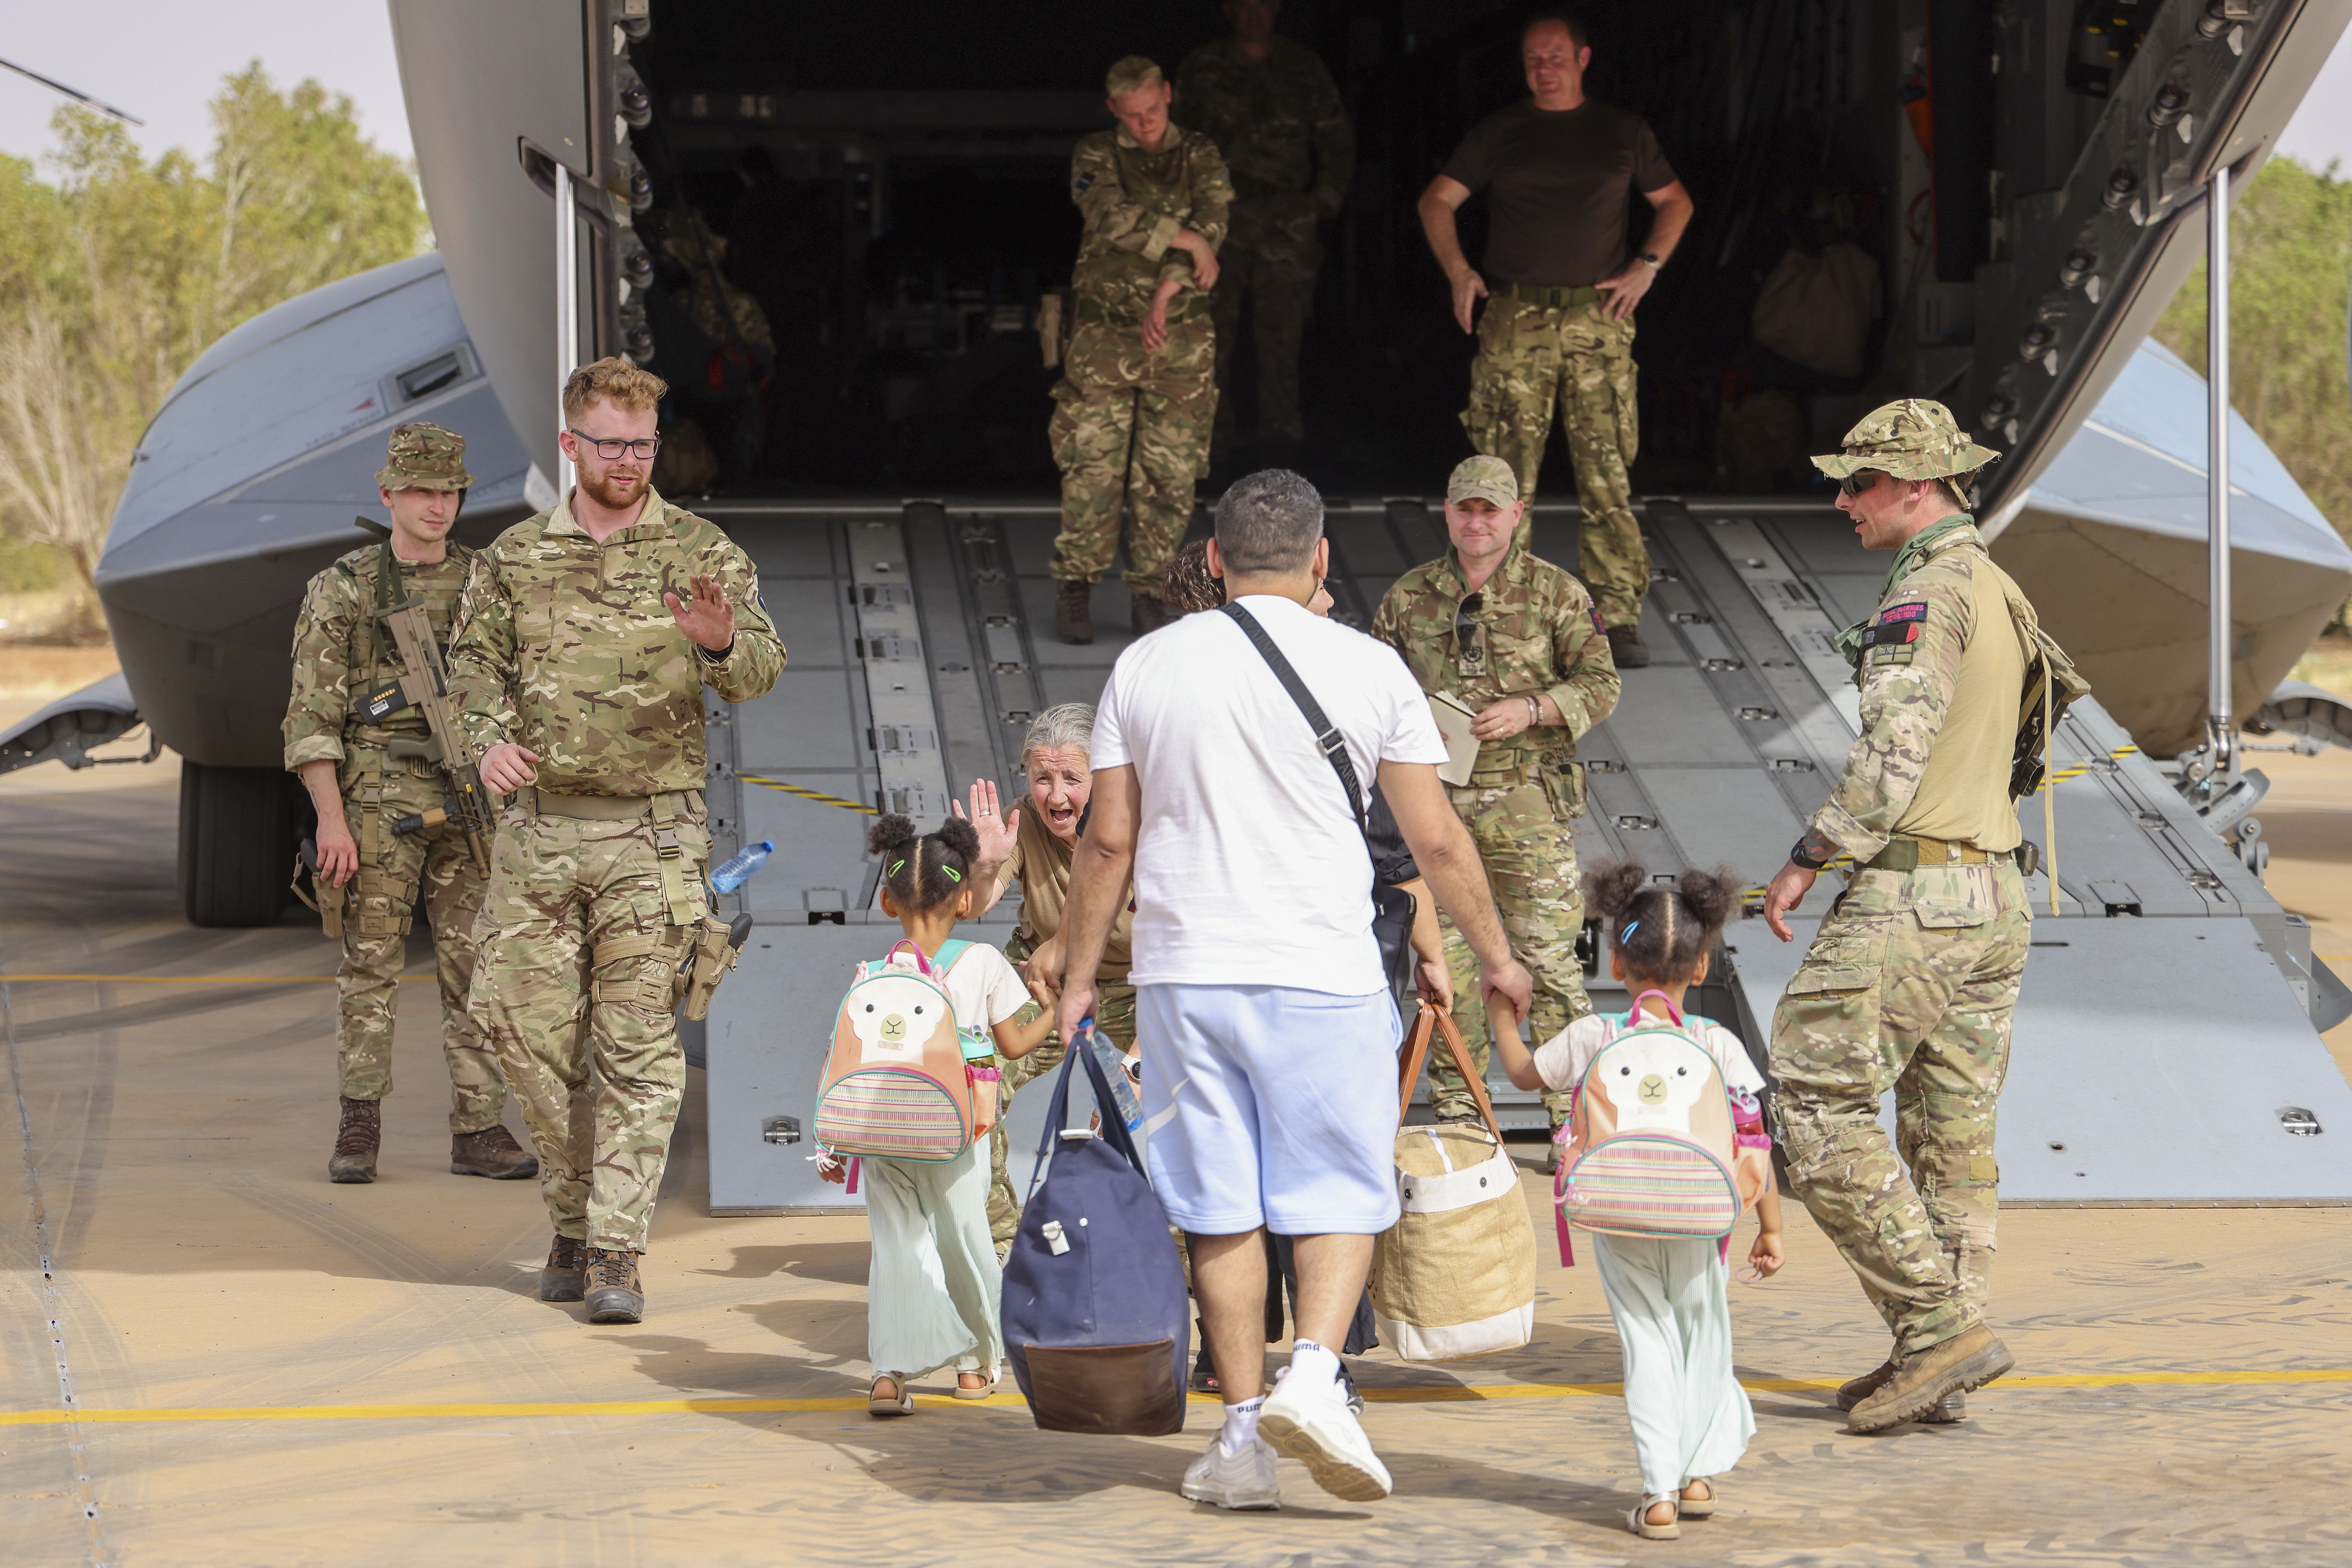 British nationals being evacuated from Khartoum, Sudan by UK military personnel (PO Phot Arron Hoare/PA)